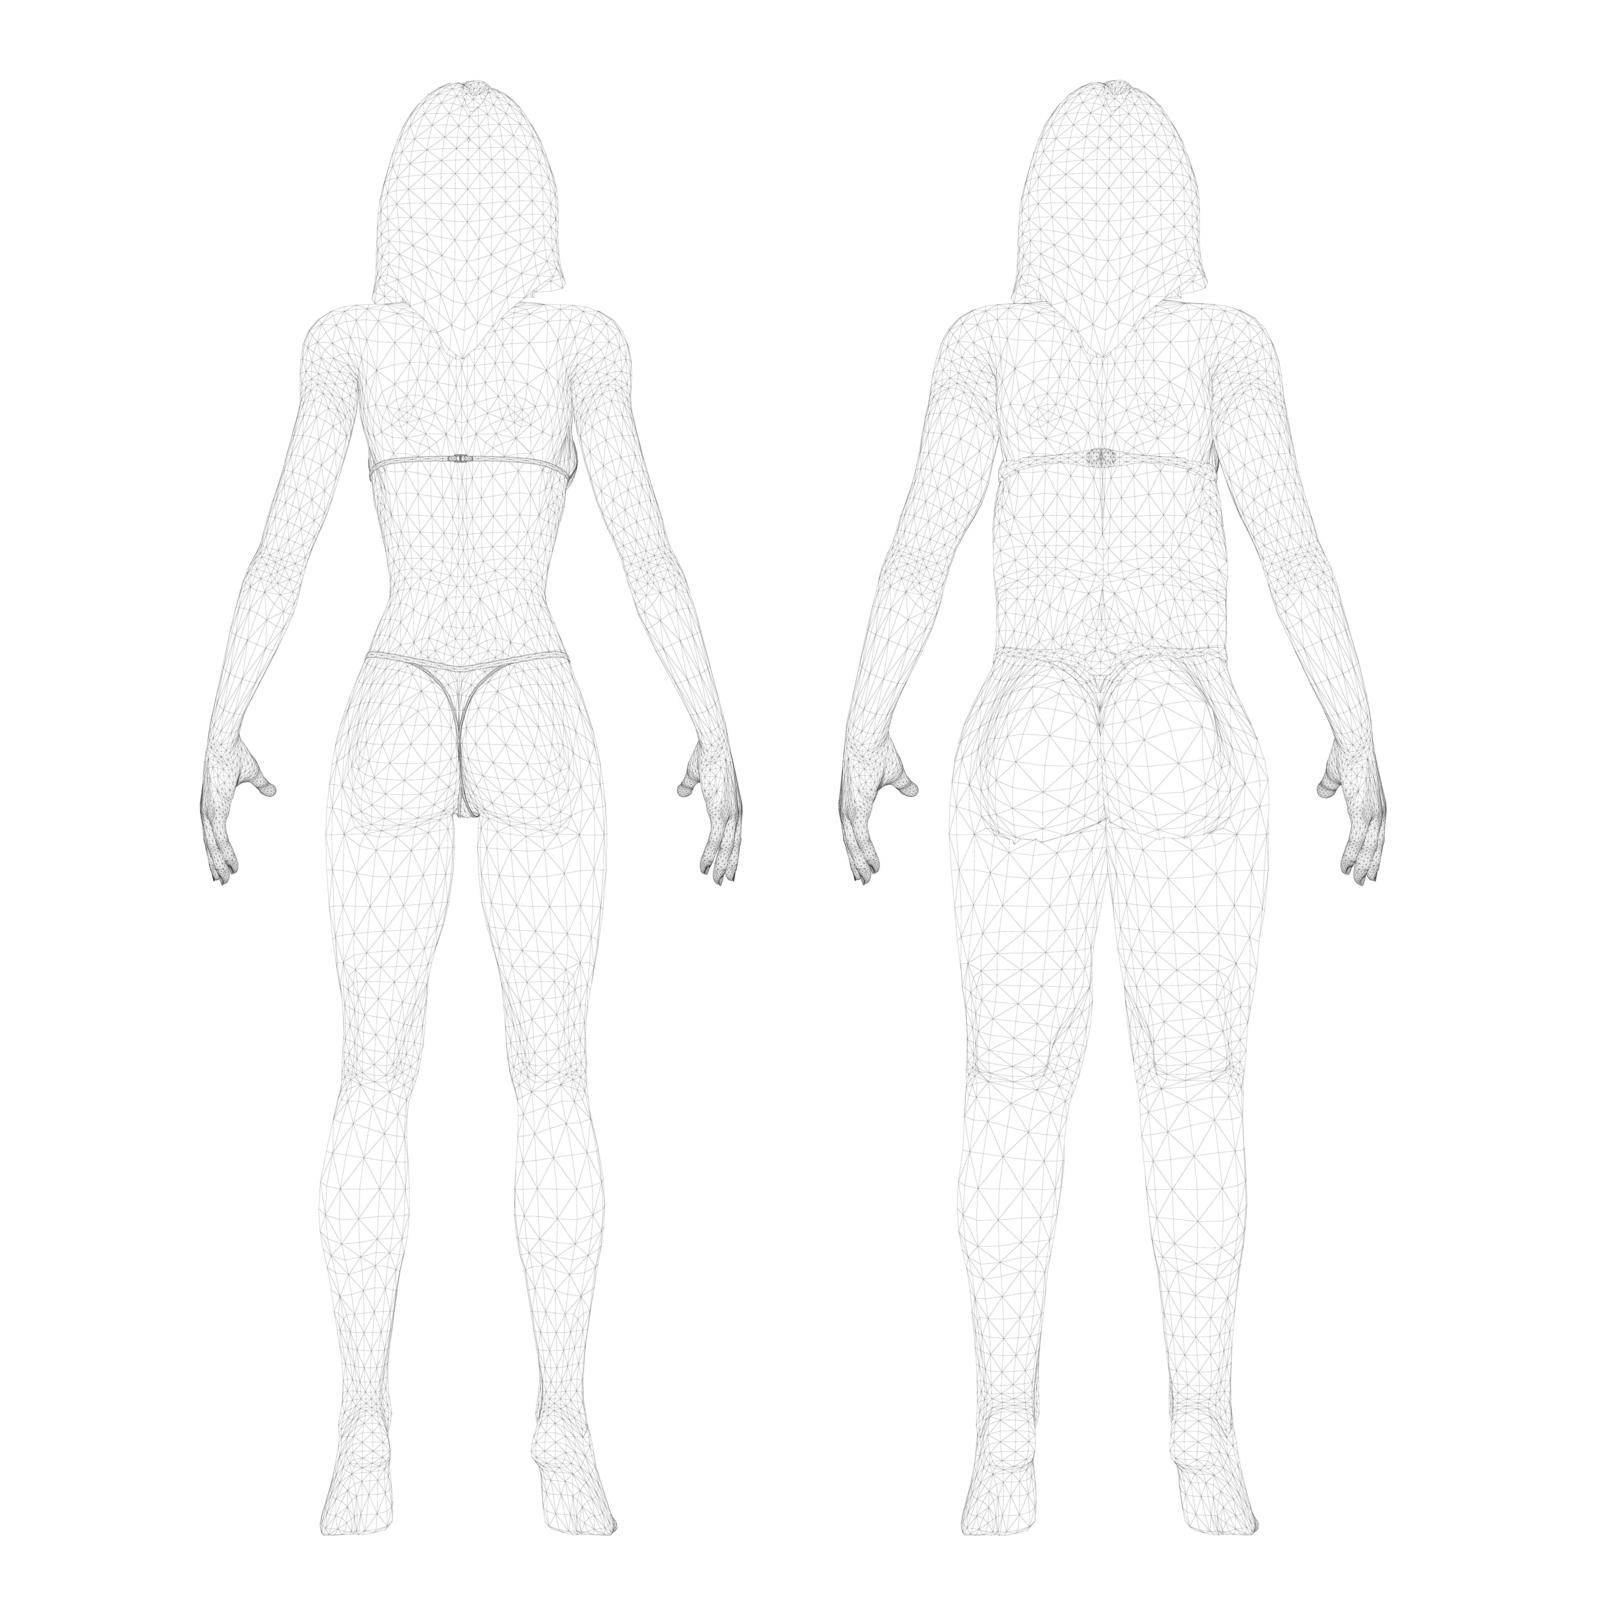 Two models of a wireframe girl in underwear, a slim and fat girl. The process of obesity of the girl body. Back view. 3D. Vector illustration.